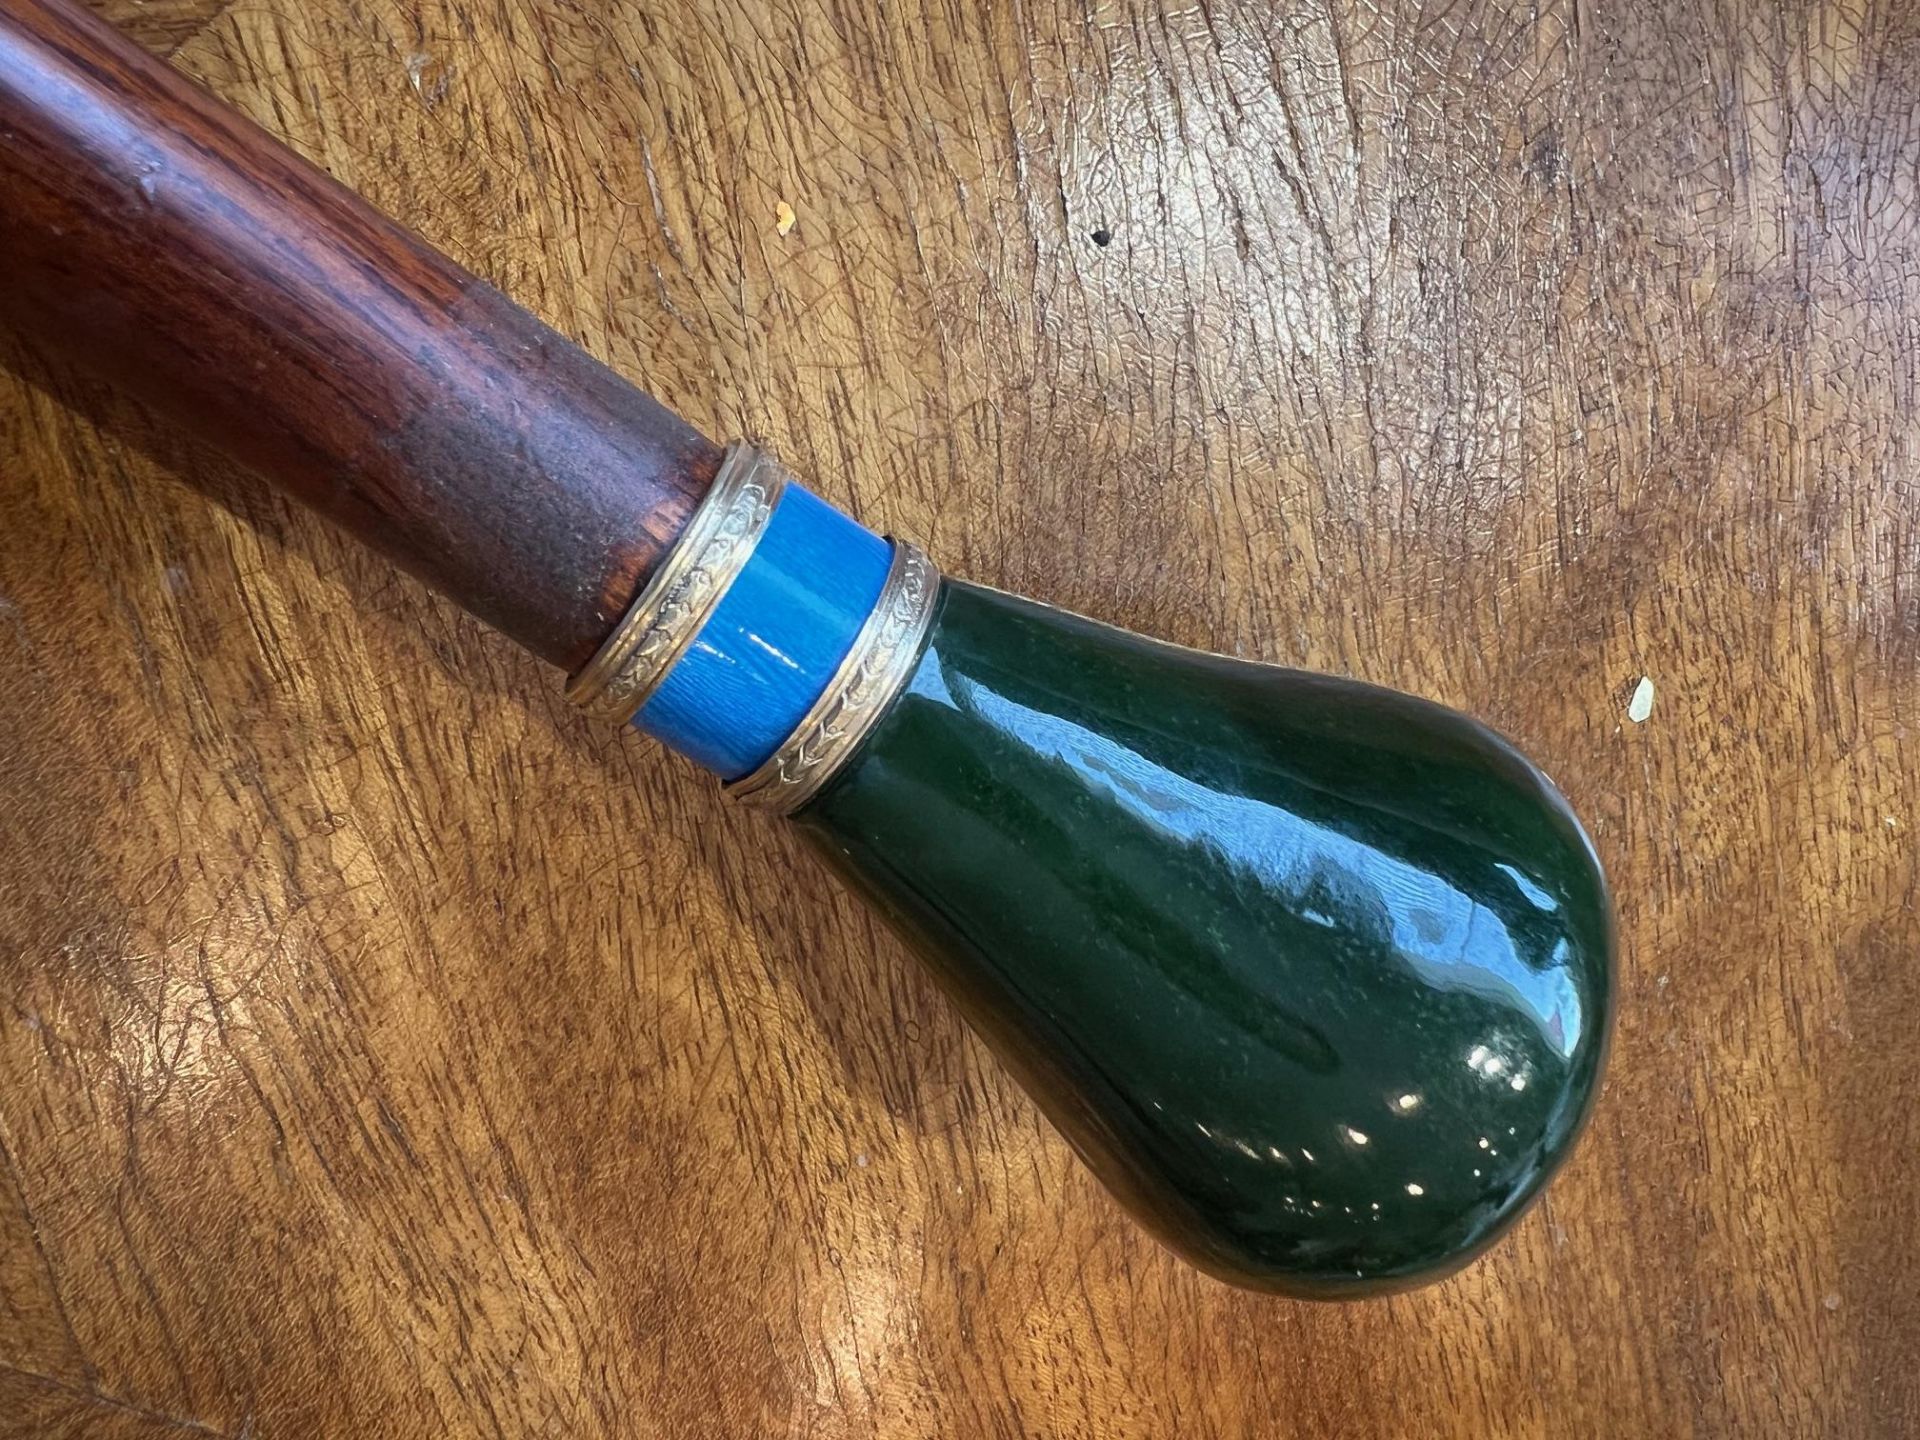 A FABERGE STYLE SILVER GILT, NEPHRITE JADE AND ENAMEL WALKING CANE - Image 8 of 8